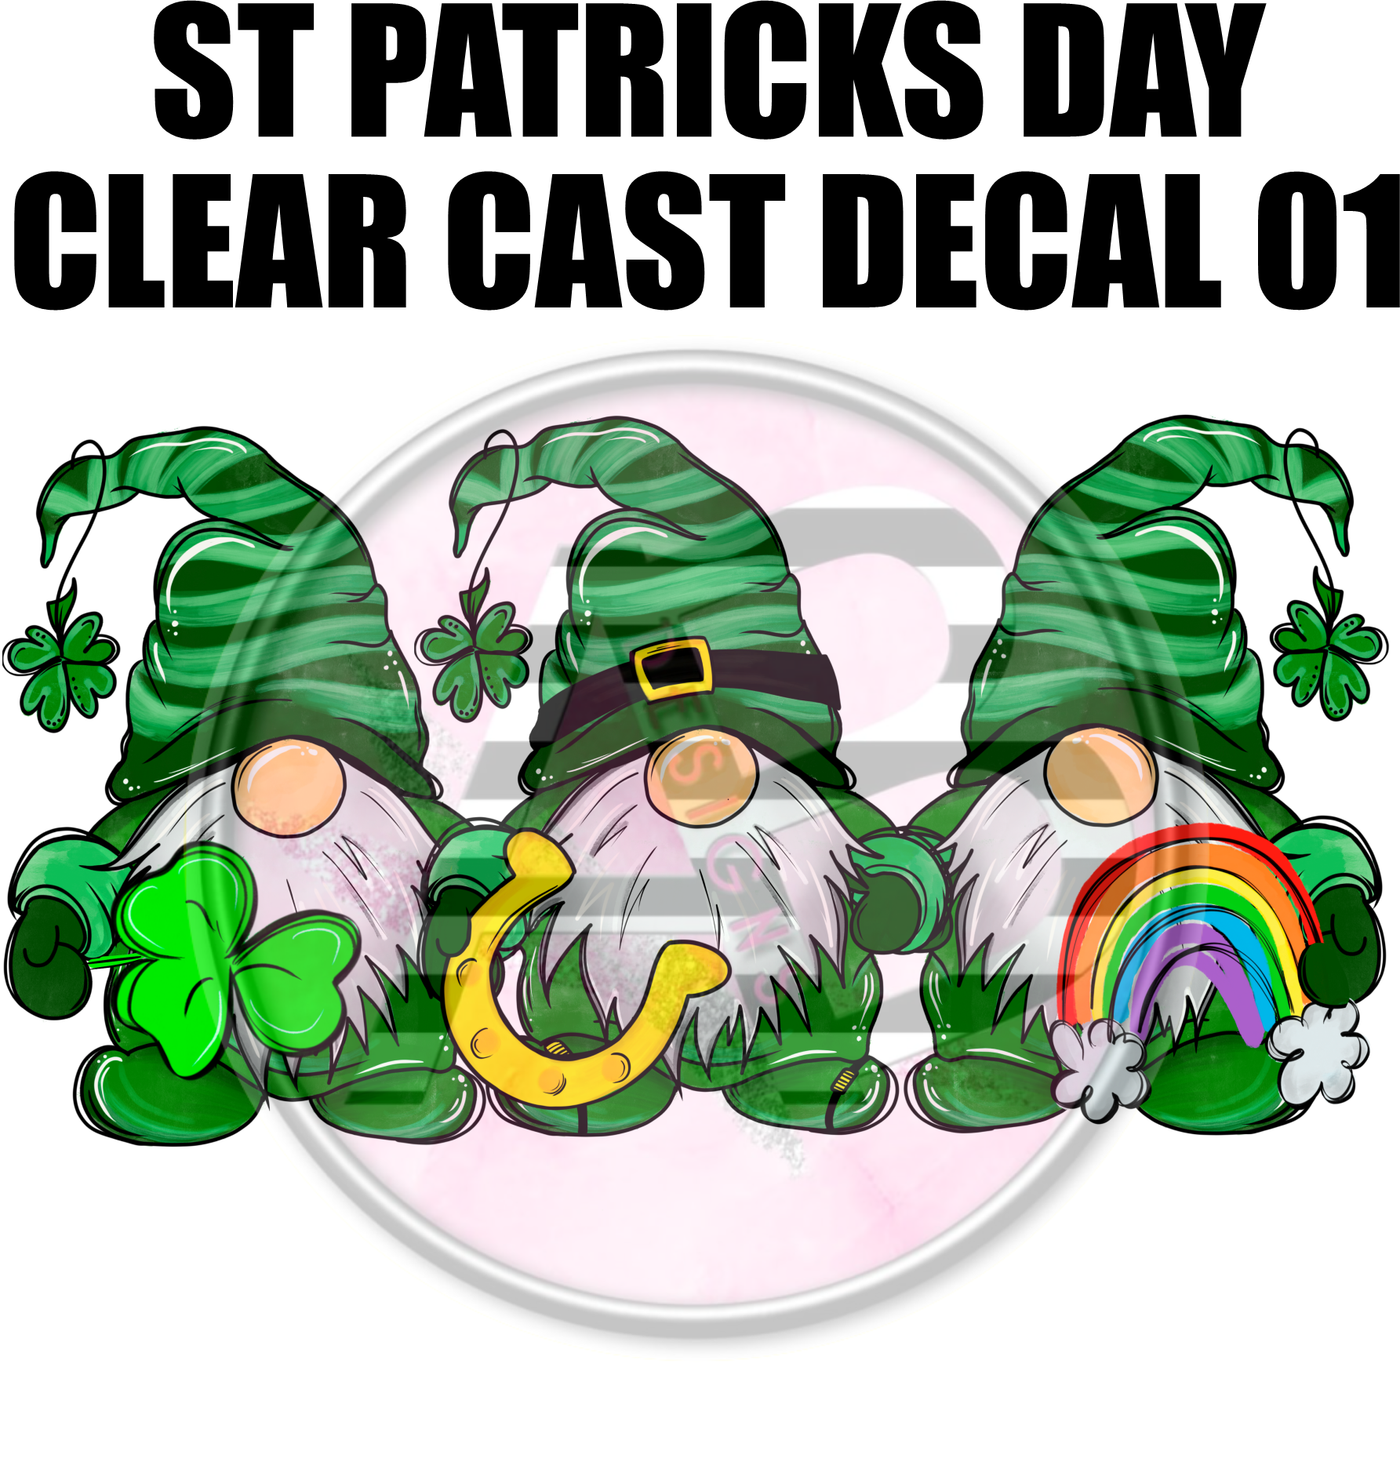 St. Patrick's Day 01 - Clear Cast Decal